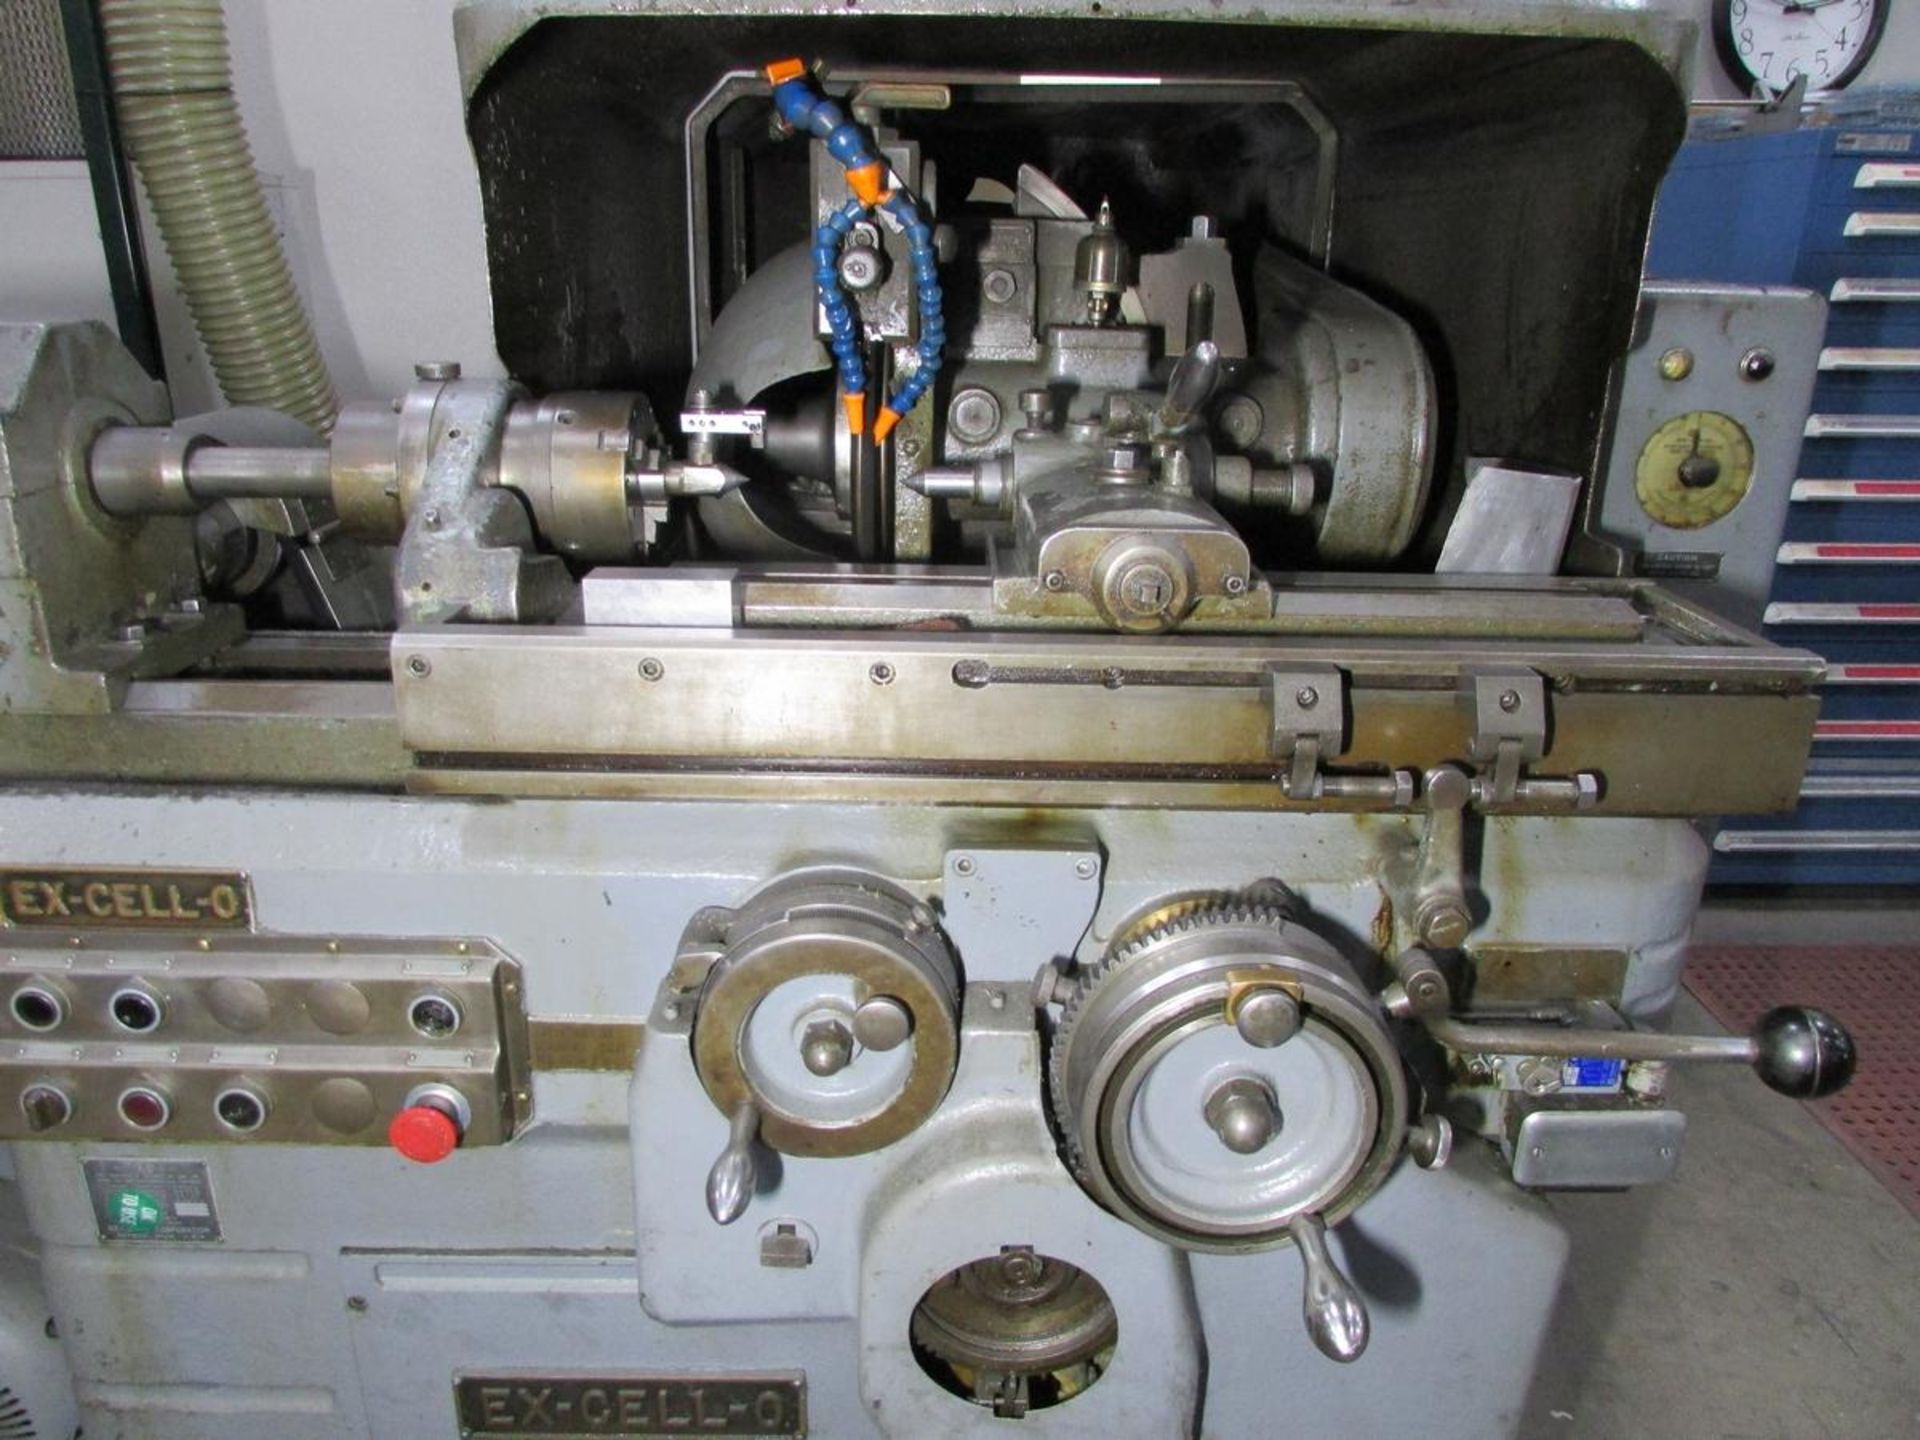 Ex-Cell-O Style 33 External Thread Grinder - Image 5 of 17